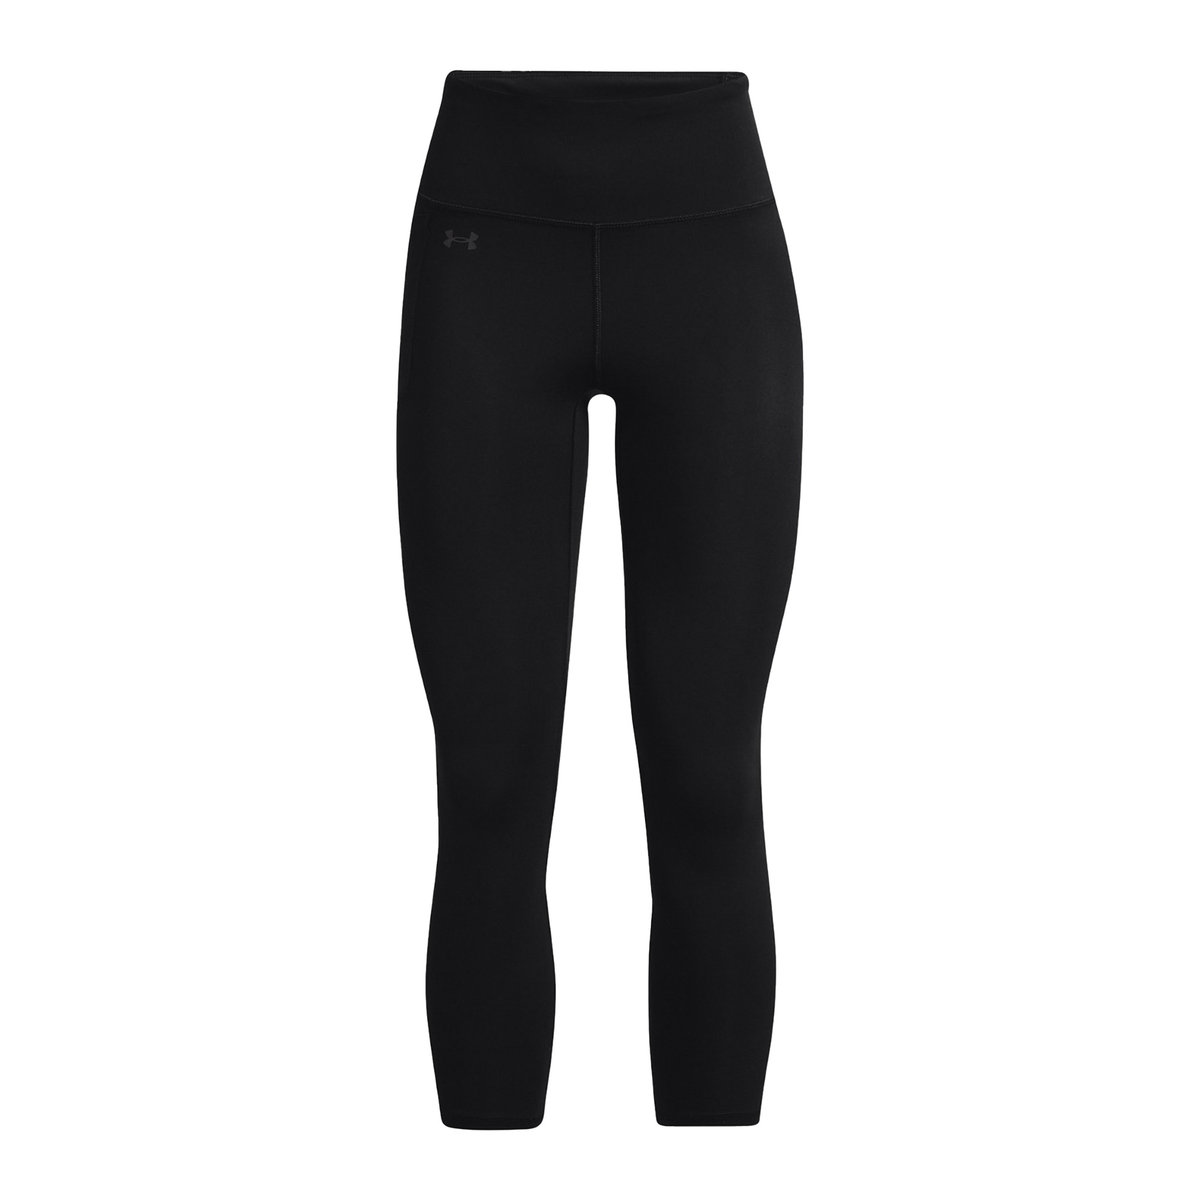 Legginsy damskie Under Armour Motion Ankle Fitted czarne 1369488-001 XS